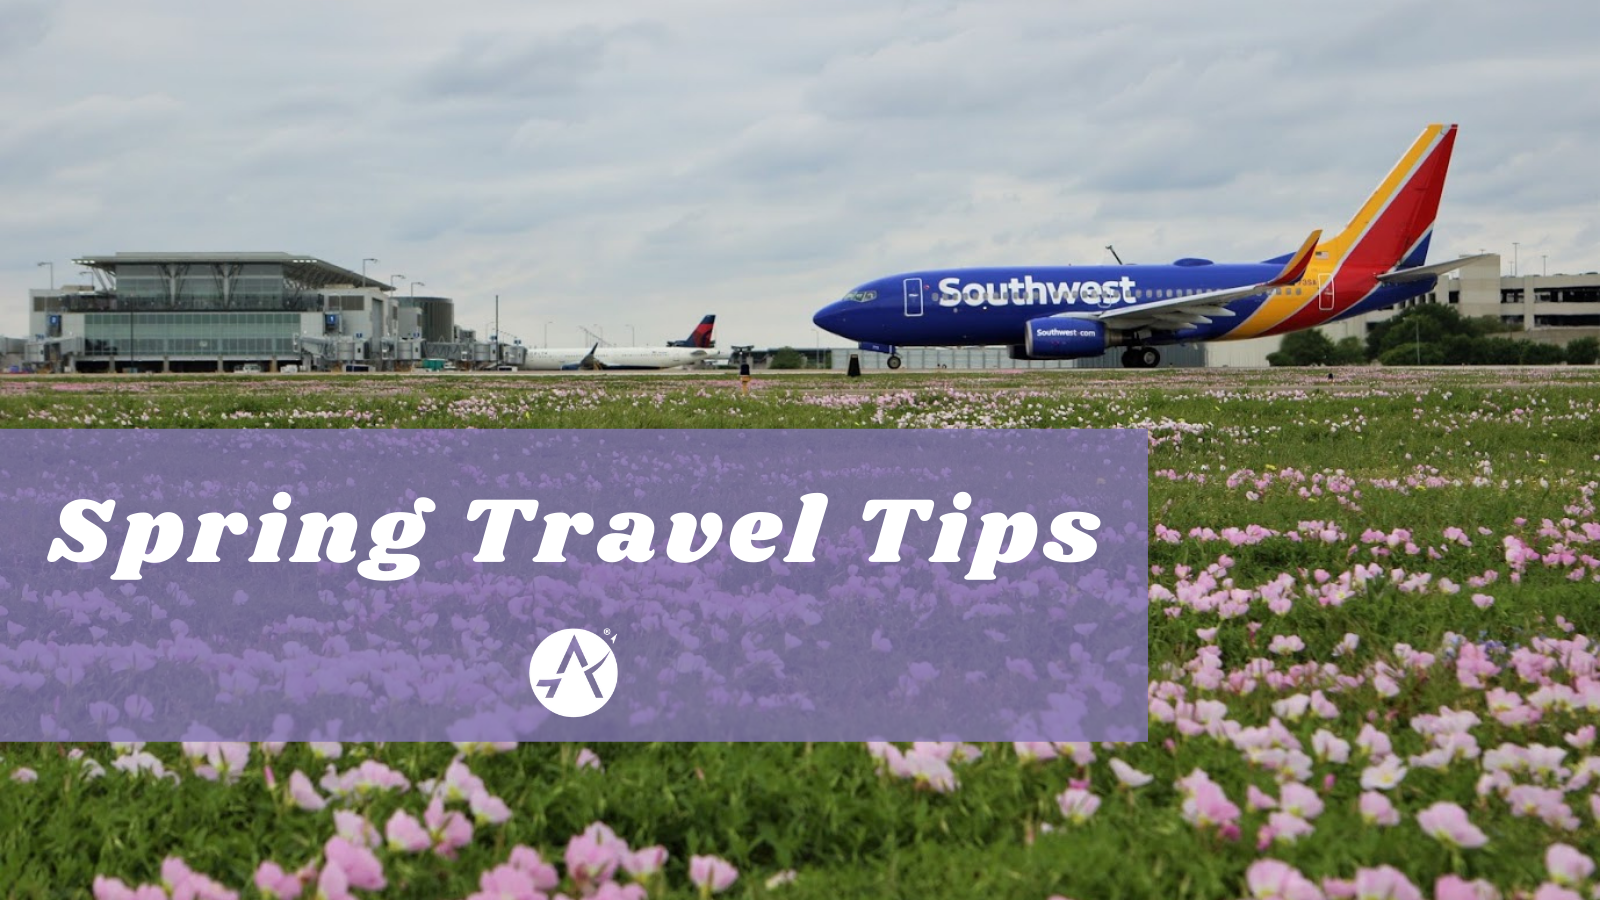 Photo of an airplane on the airfield surrounded by a field of pink flowers. Text reads: Spring Travel Tips